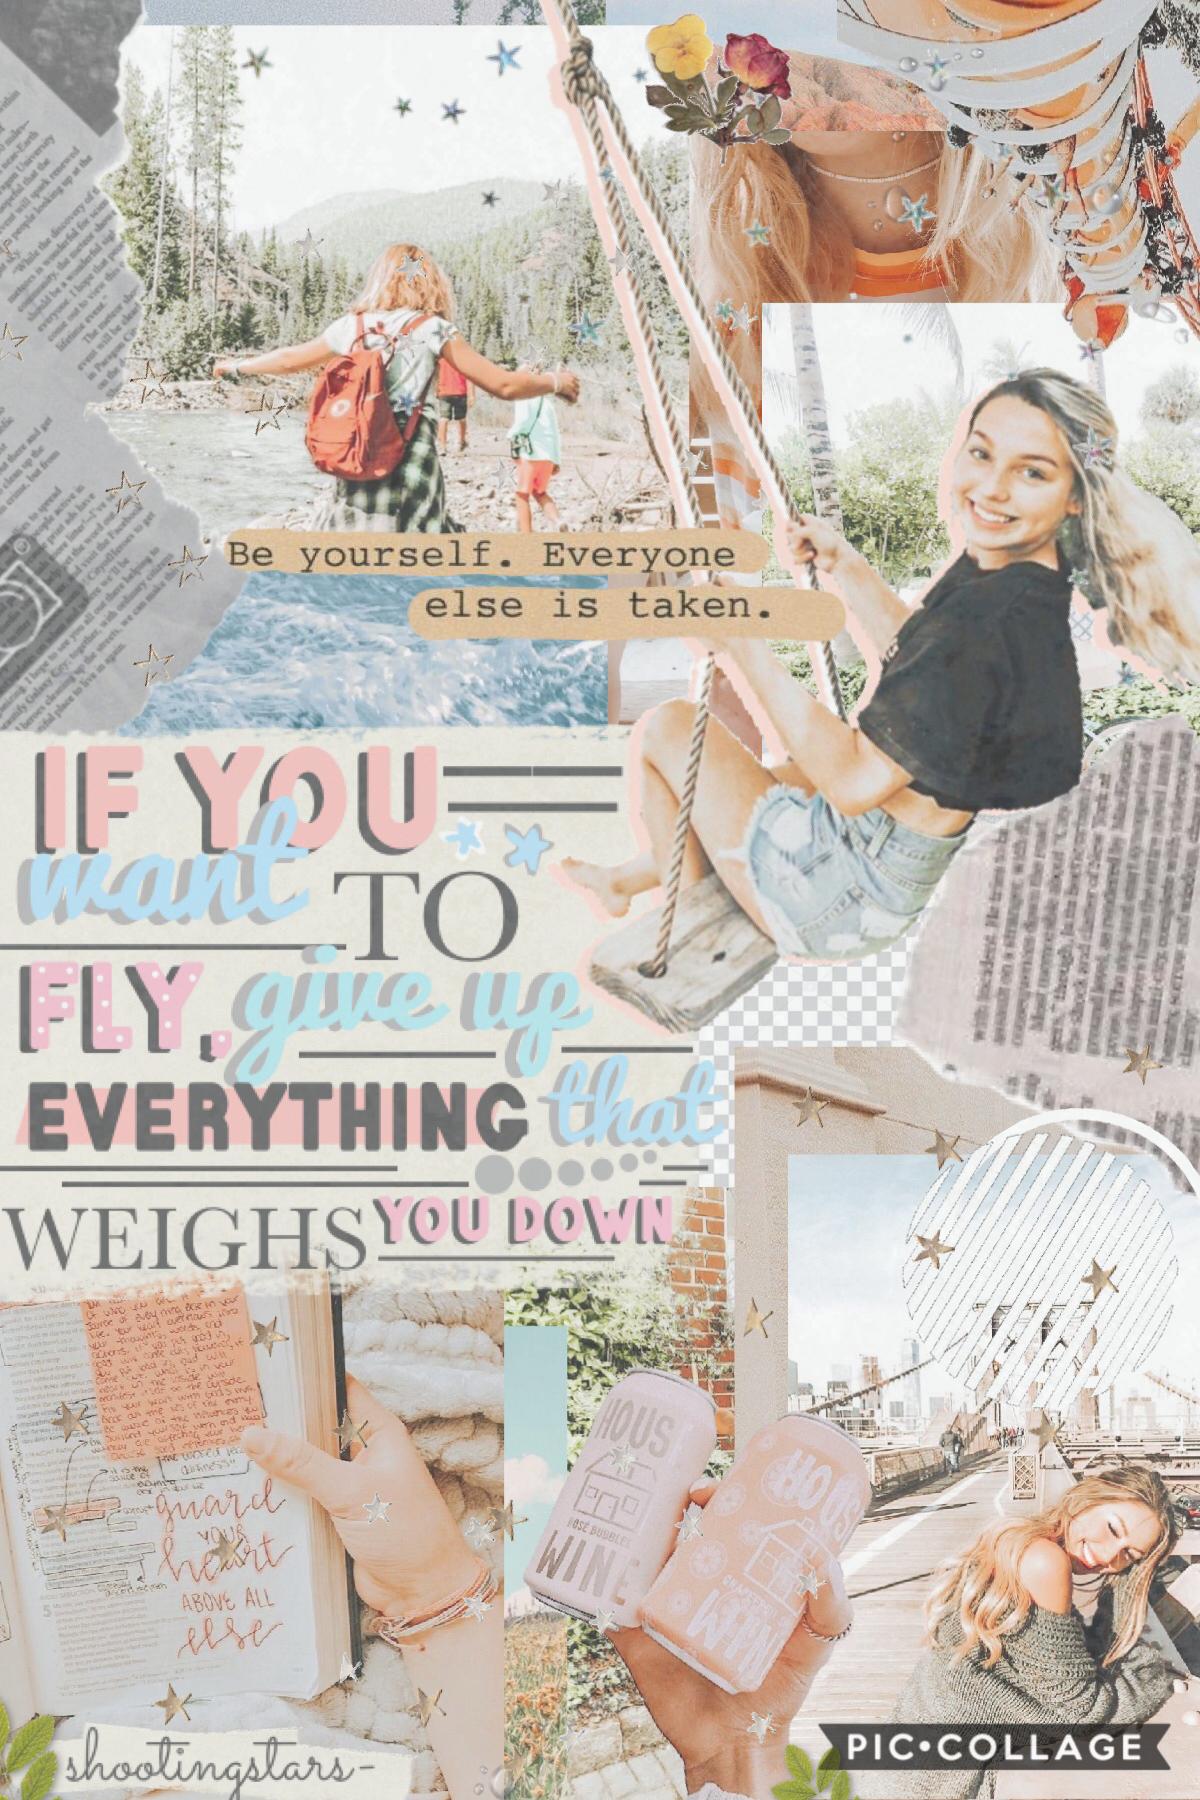 first collage in a while 💗🌸 i’m trying to make a travel bucket list, so does anyone have any country suggestions? 🦋🌊☁️ i’m thinking about either italy or australia 🌻💫🌙 how is everyone doing? 🌺🍓🌿